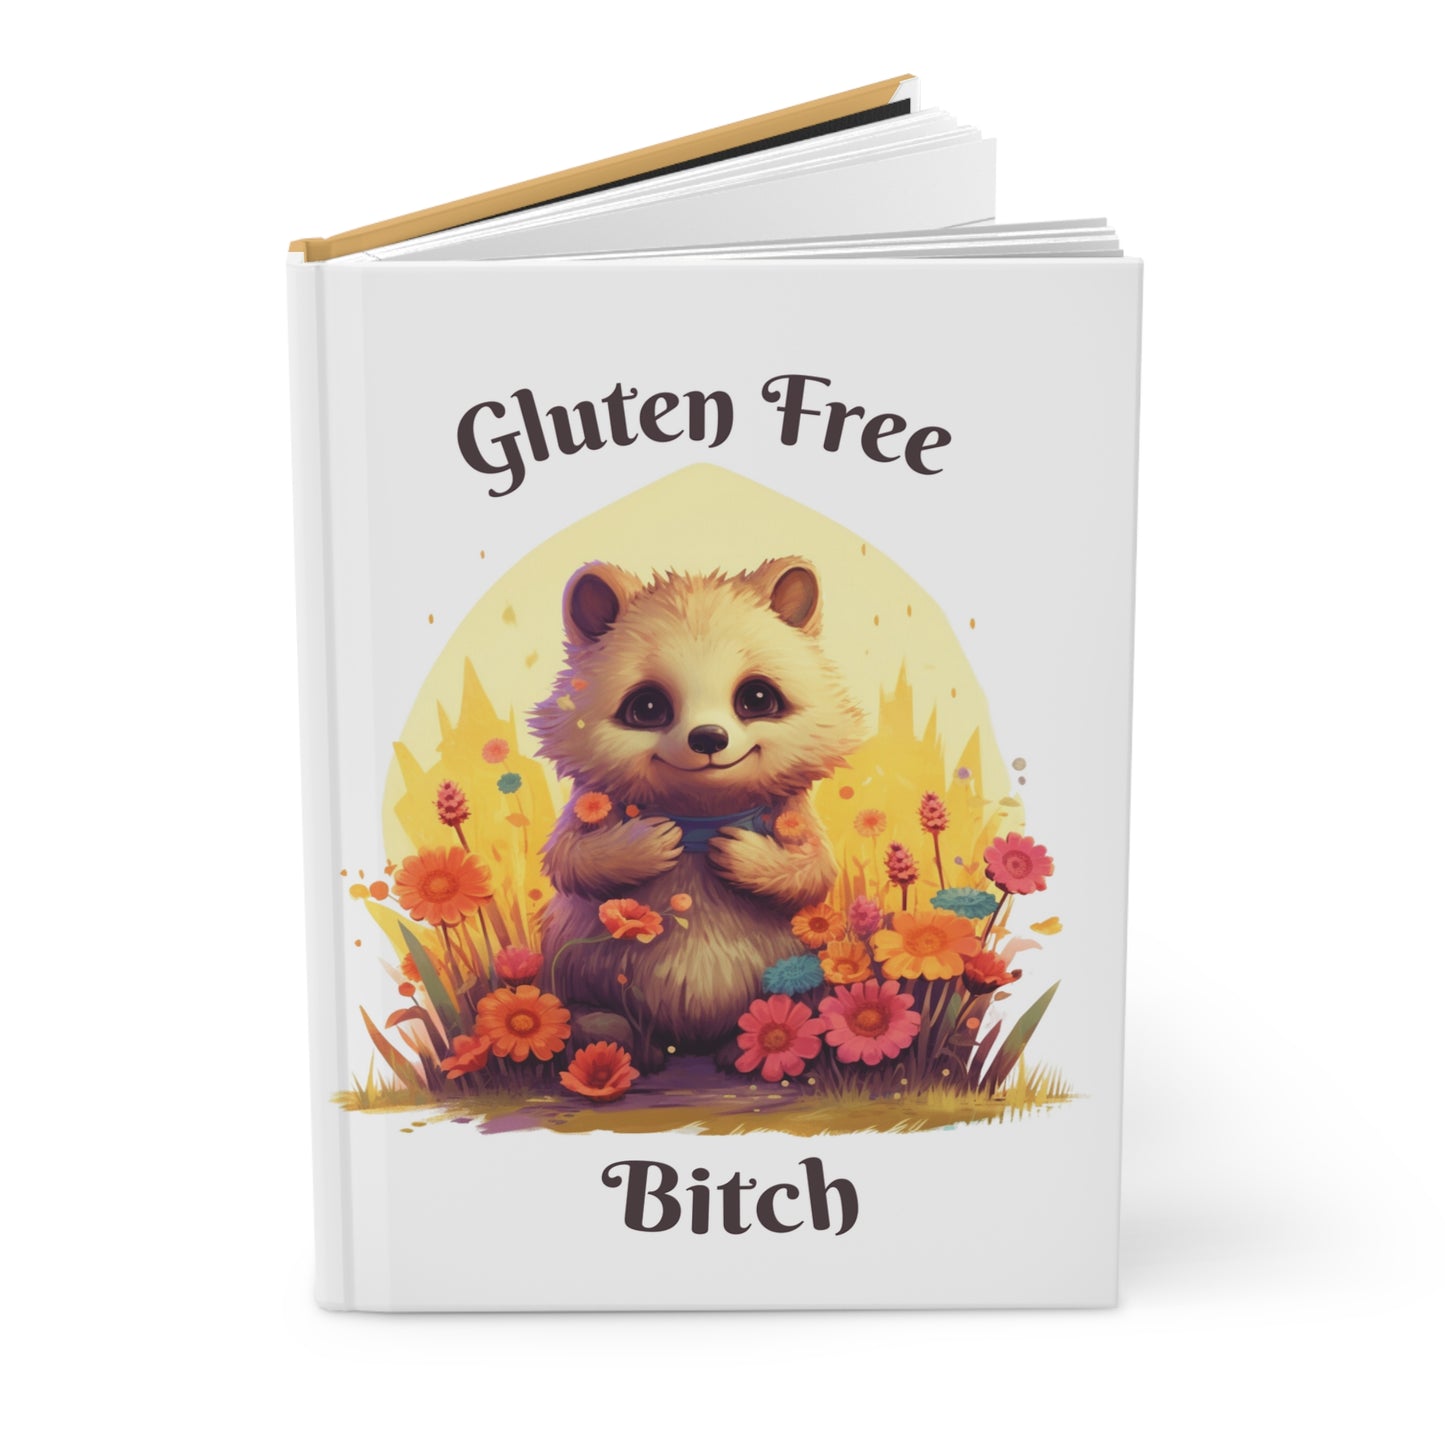 Gluten-Free Bitch Journal: Hardcover Notebook for Wellness, Gratitude & Mindfulness, Daily Reflection, Self Care, 5.75"x7.5" Lined Pages